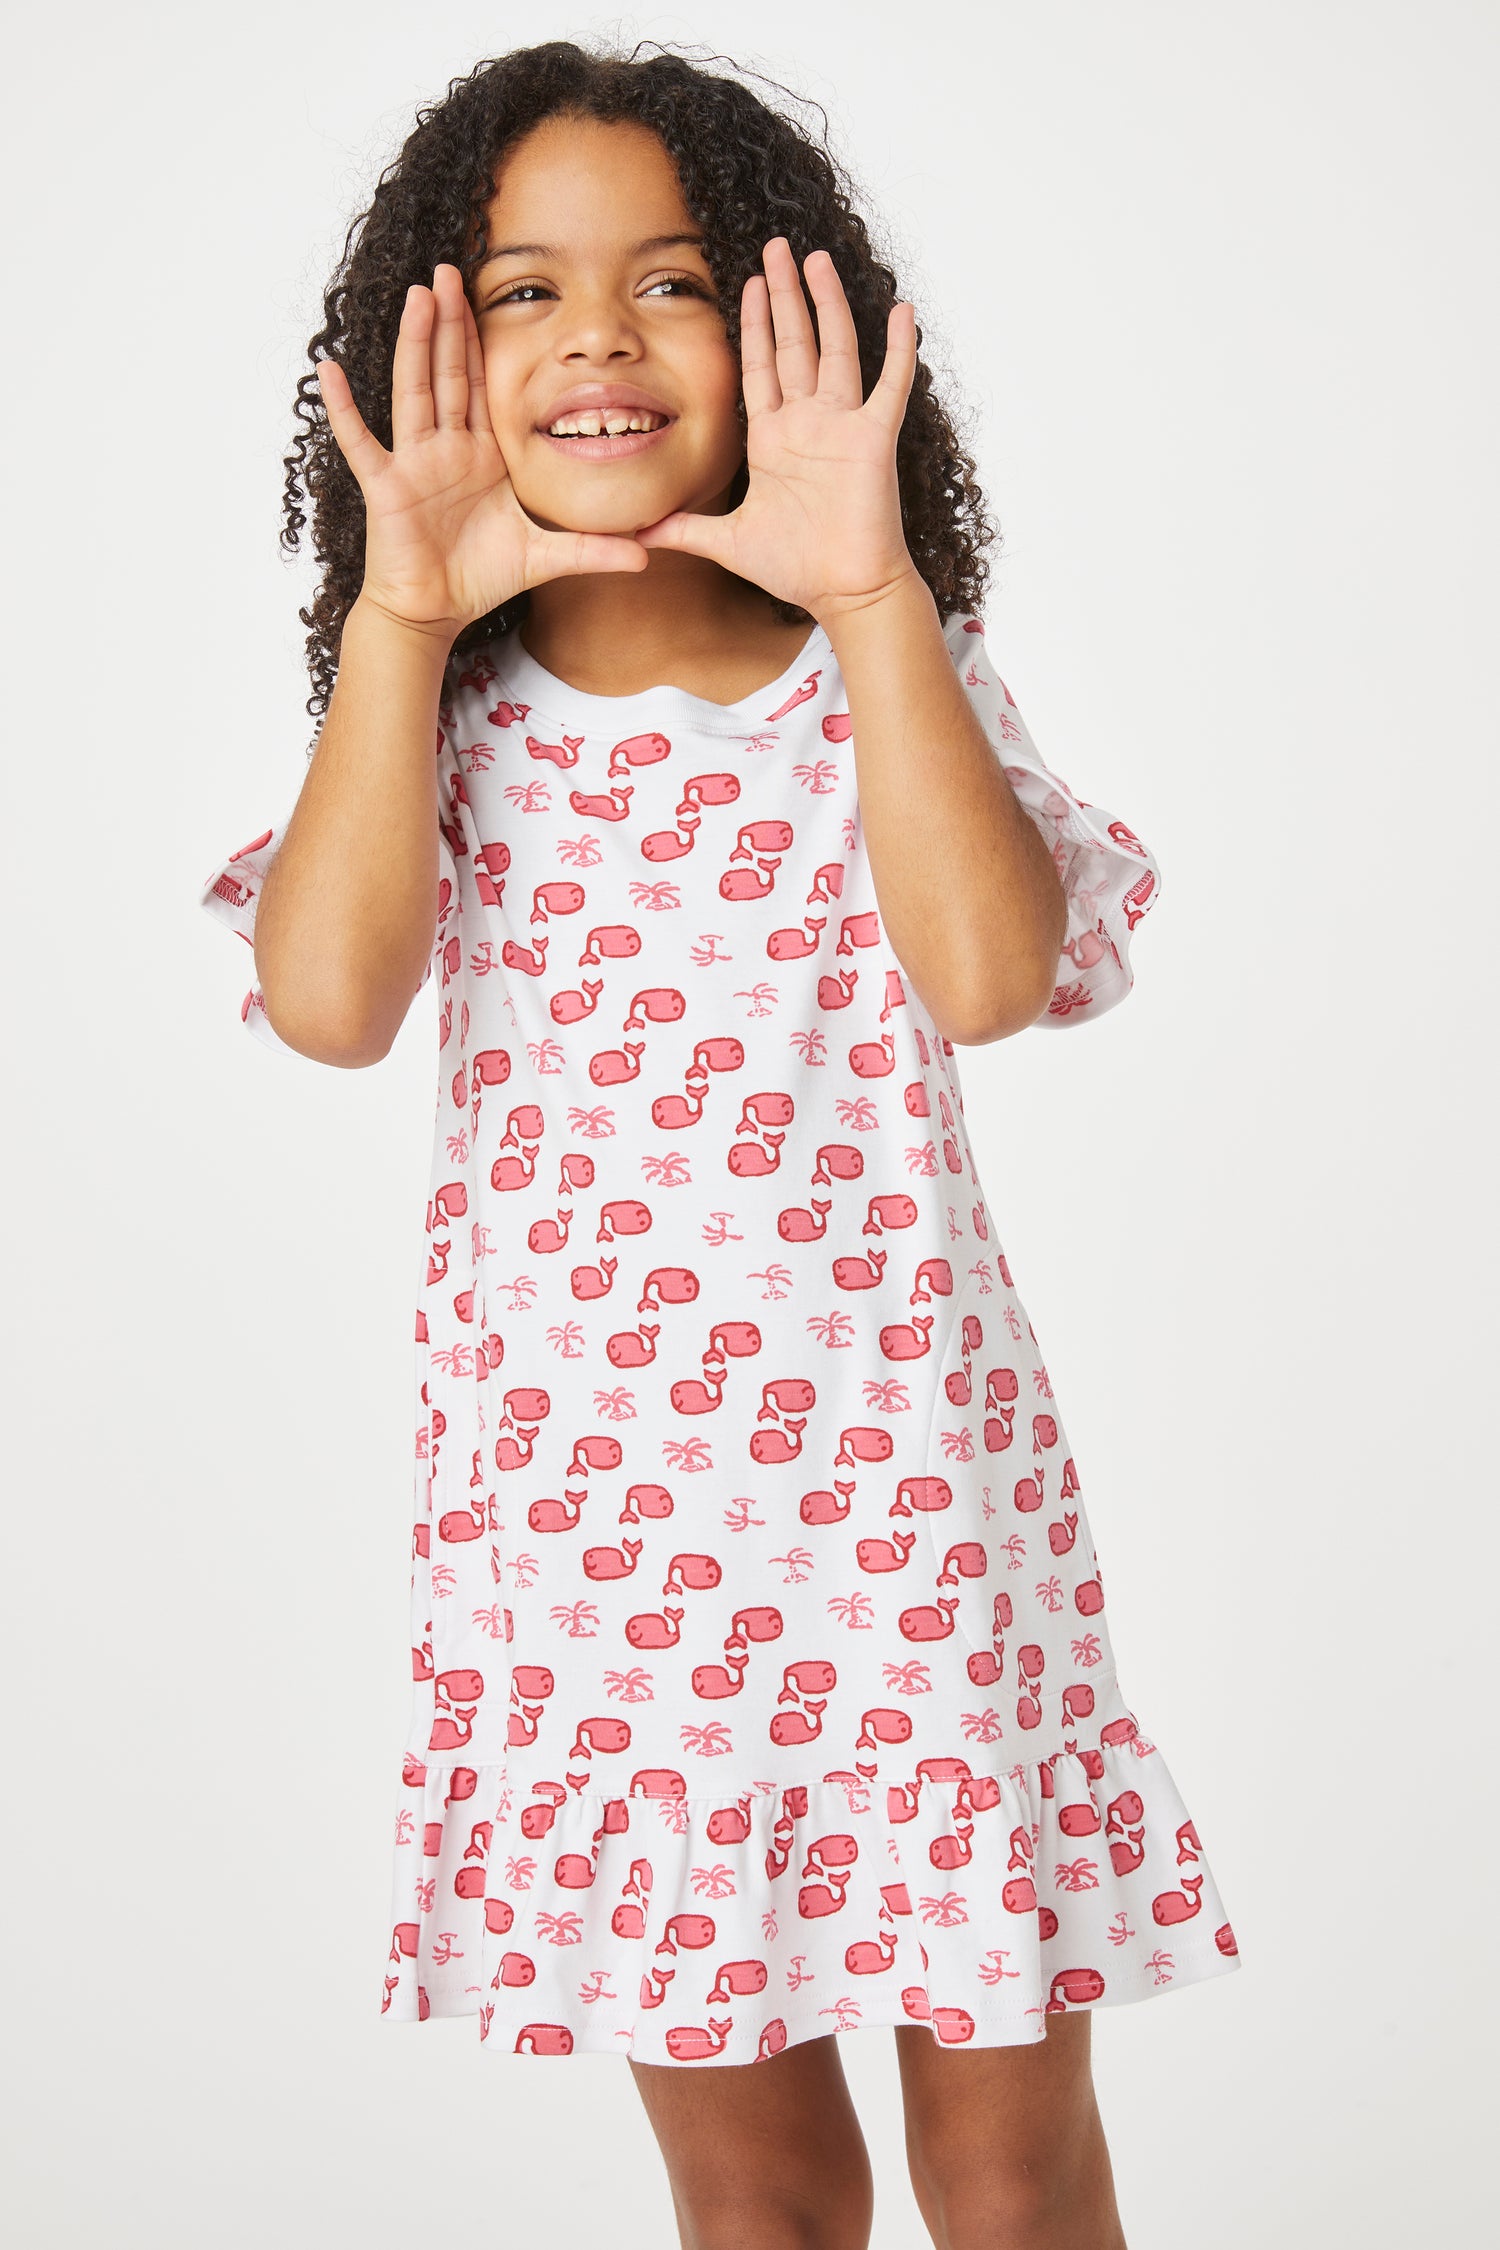 The Esme Play Dress Collection